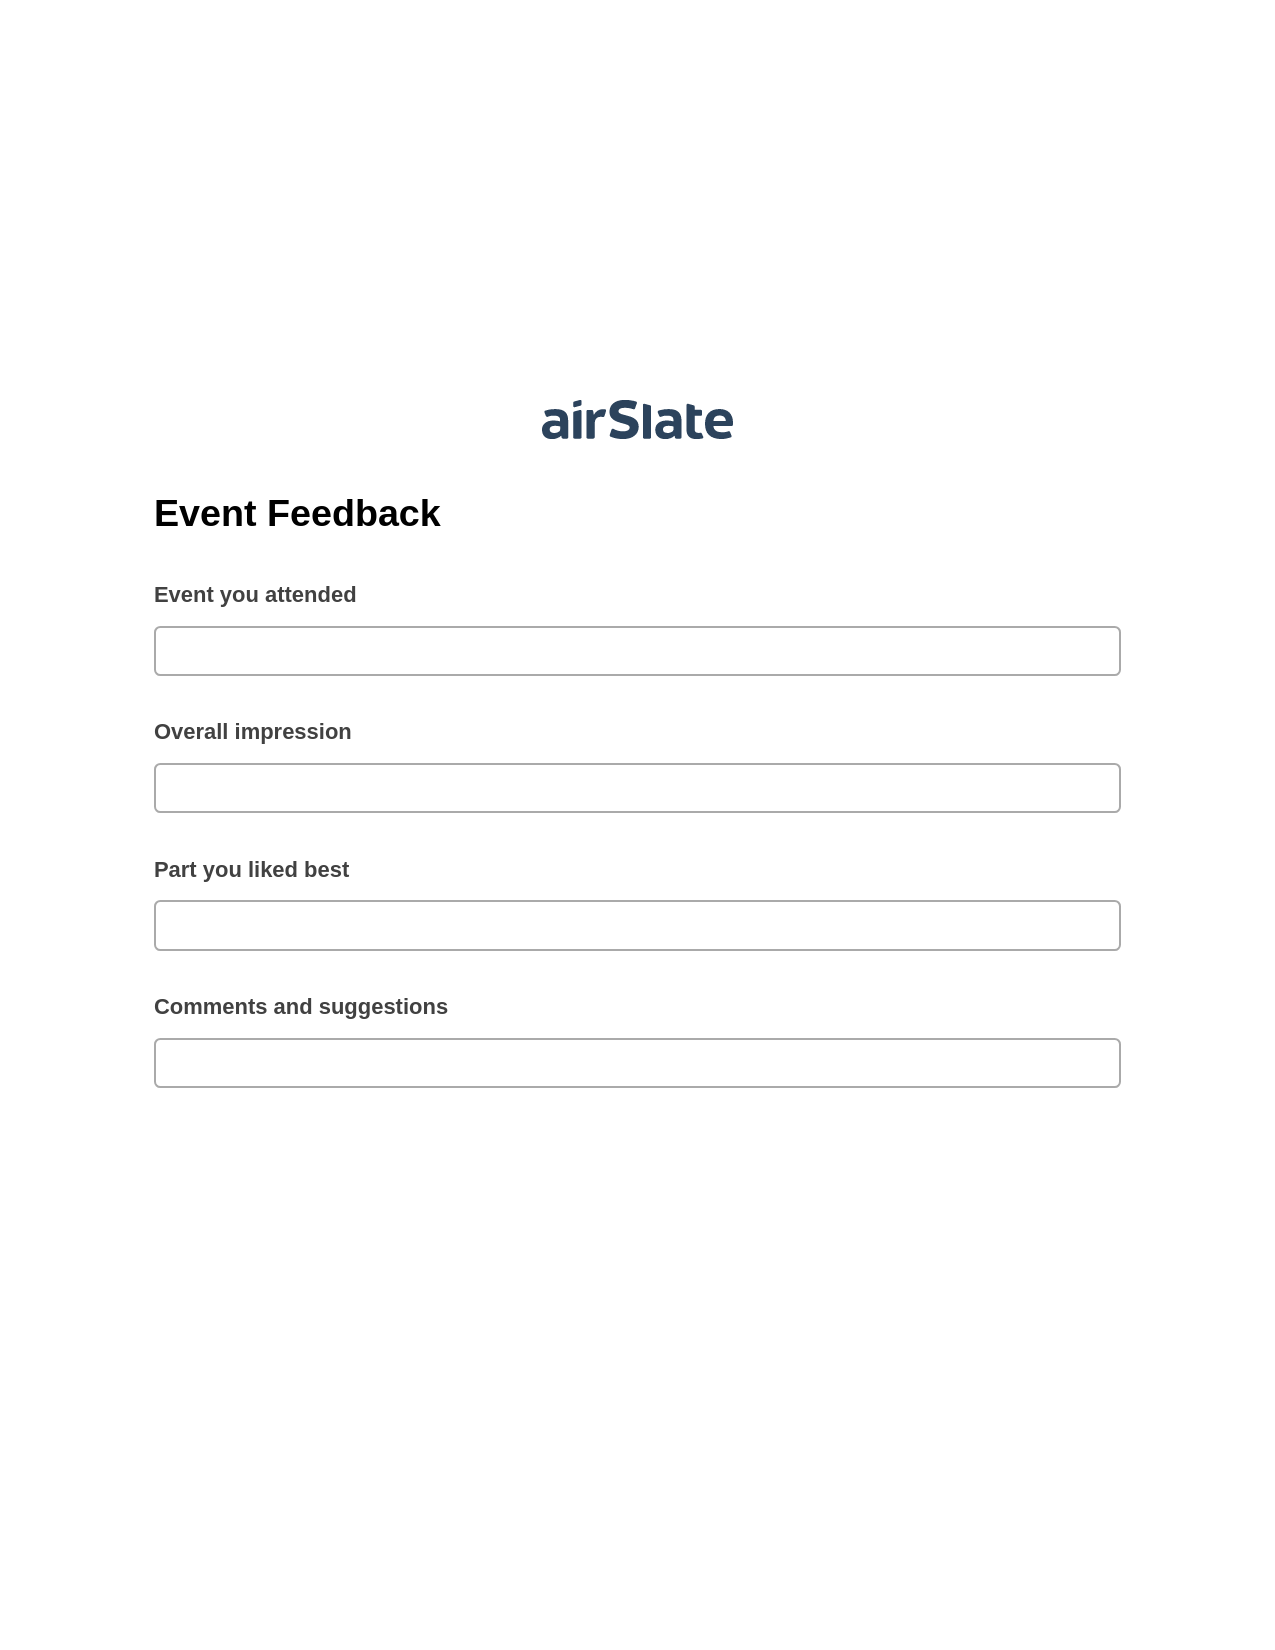 Event Feedback Pre-fill Dropdown from Airtable, Export to MS Dynamics 365 Bot, Post-finish Document Bot